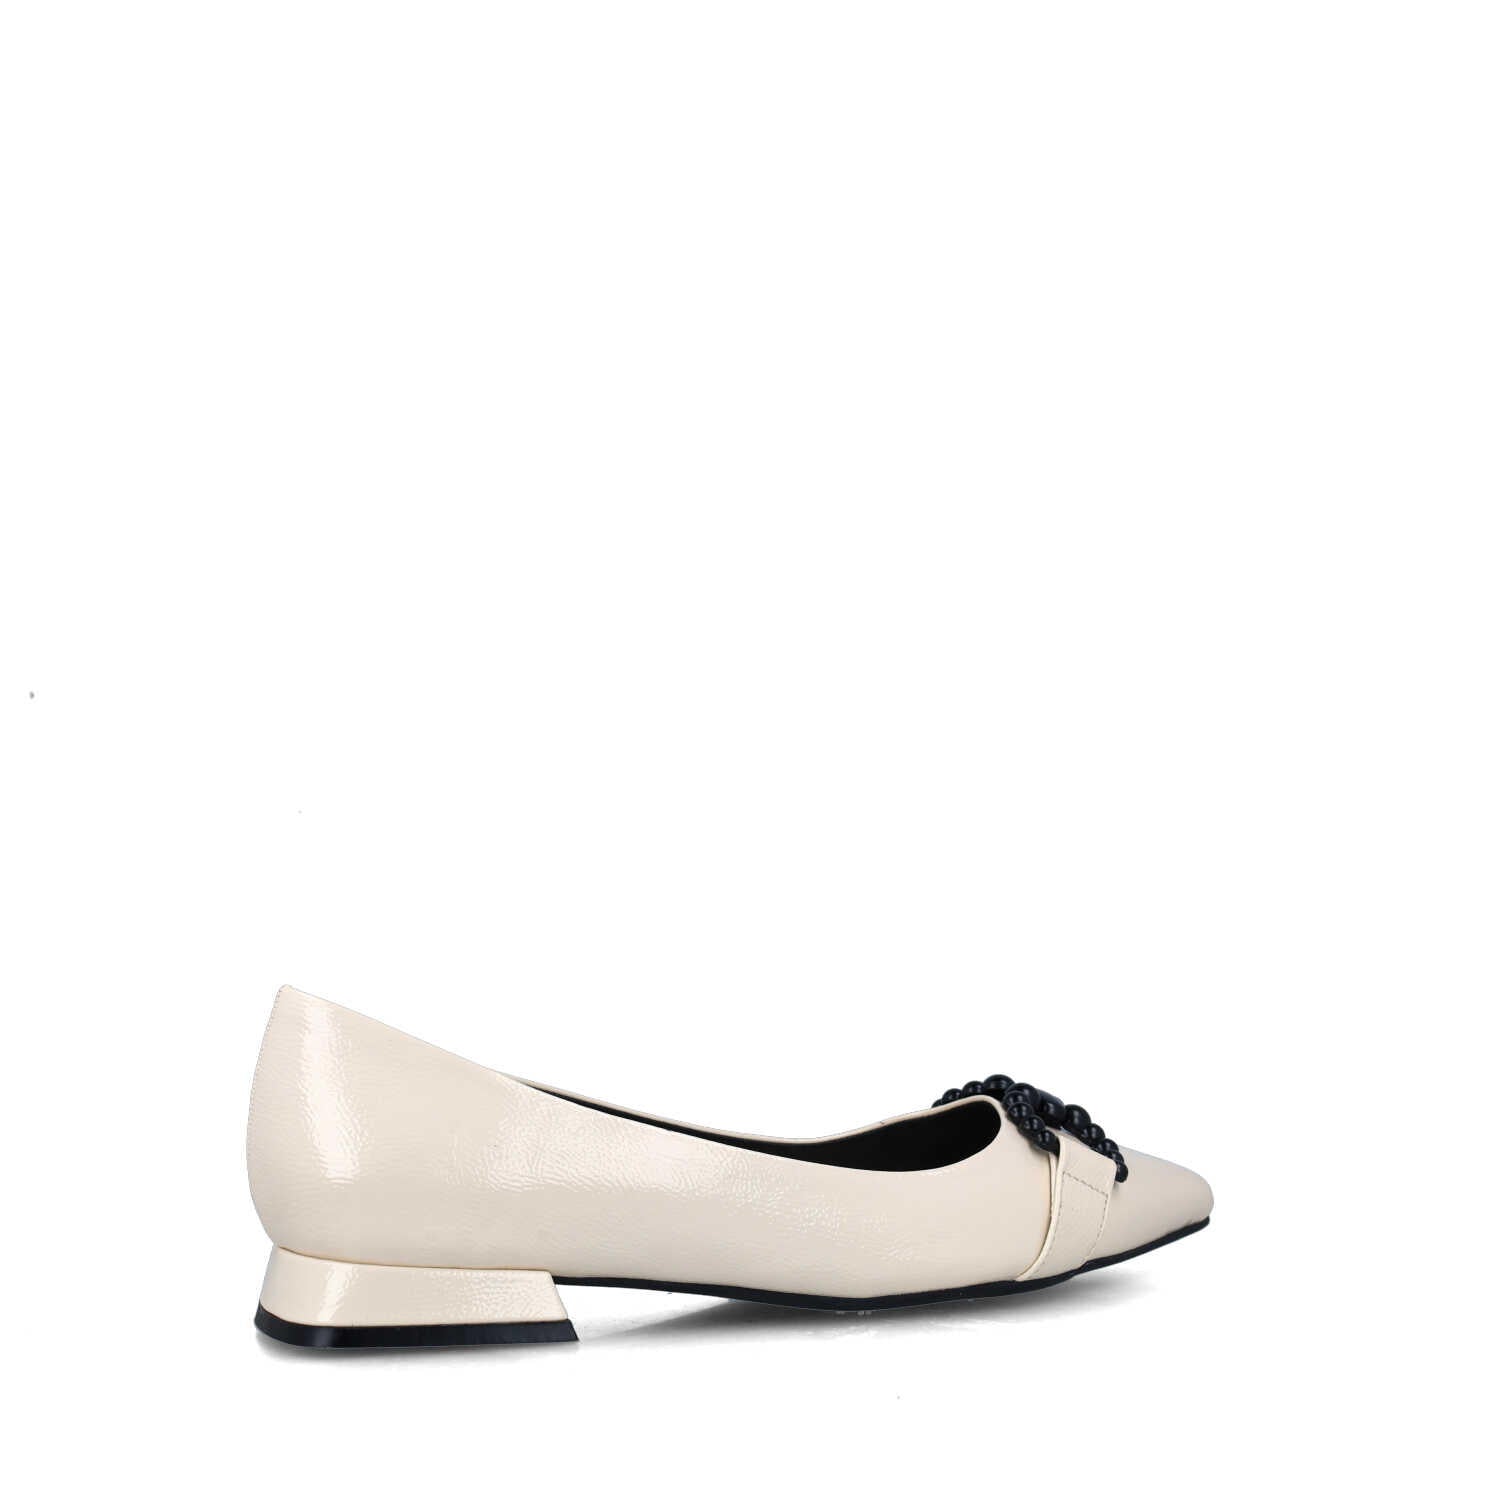 White Flats With Buckle_25308_06_03